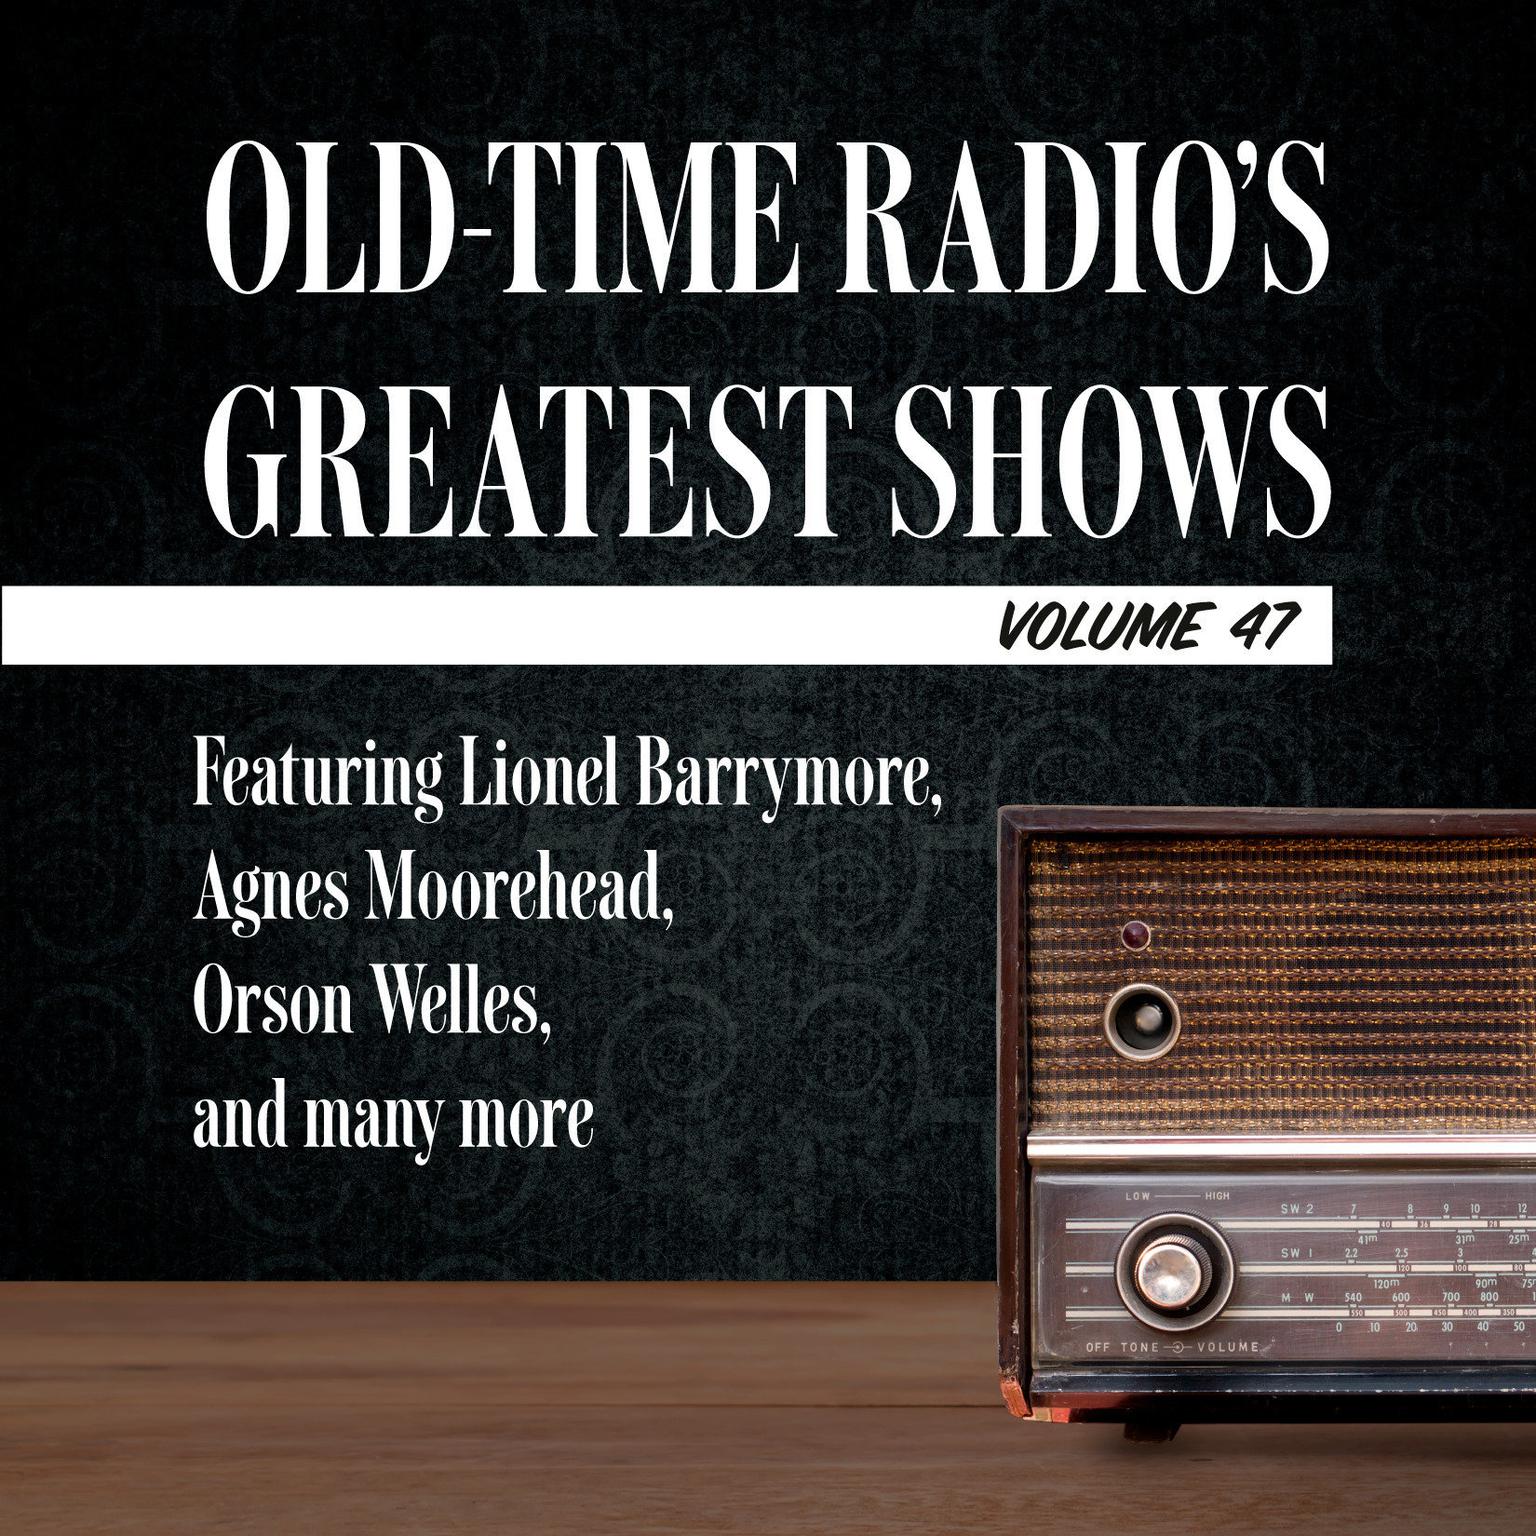 Old-Time Radios Greatest Shows, Volume 47: Featuring Lionel Barrymore, Agnes Moorehead, Orson Welles, and many more Audiobook, by Carl Amari